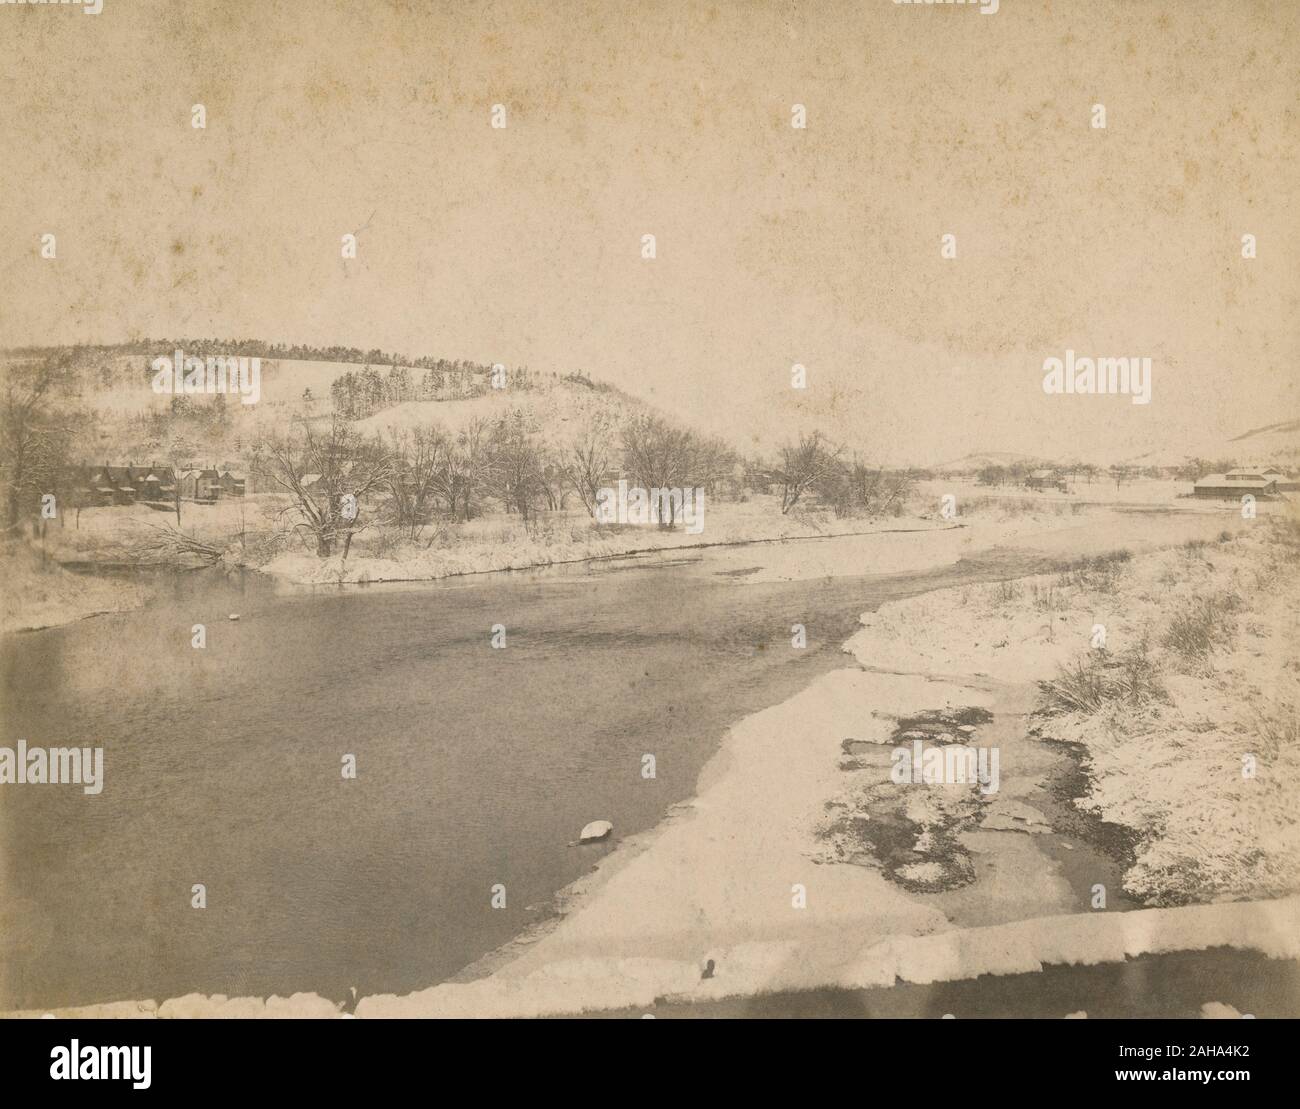 Antique c1890 photograph, “looking up the Chenango River from the New York Susquehanna & Western Railway bridge in winter of 1890-91.” Photo likely taken in town of Chenango Bridge, NY. SOURCE: ORIGINAL PHOTOGRAPH Stock Photo